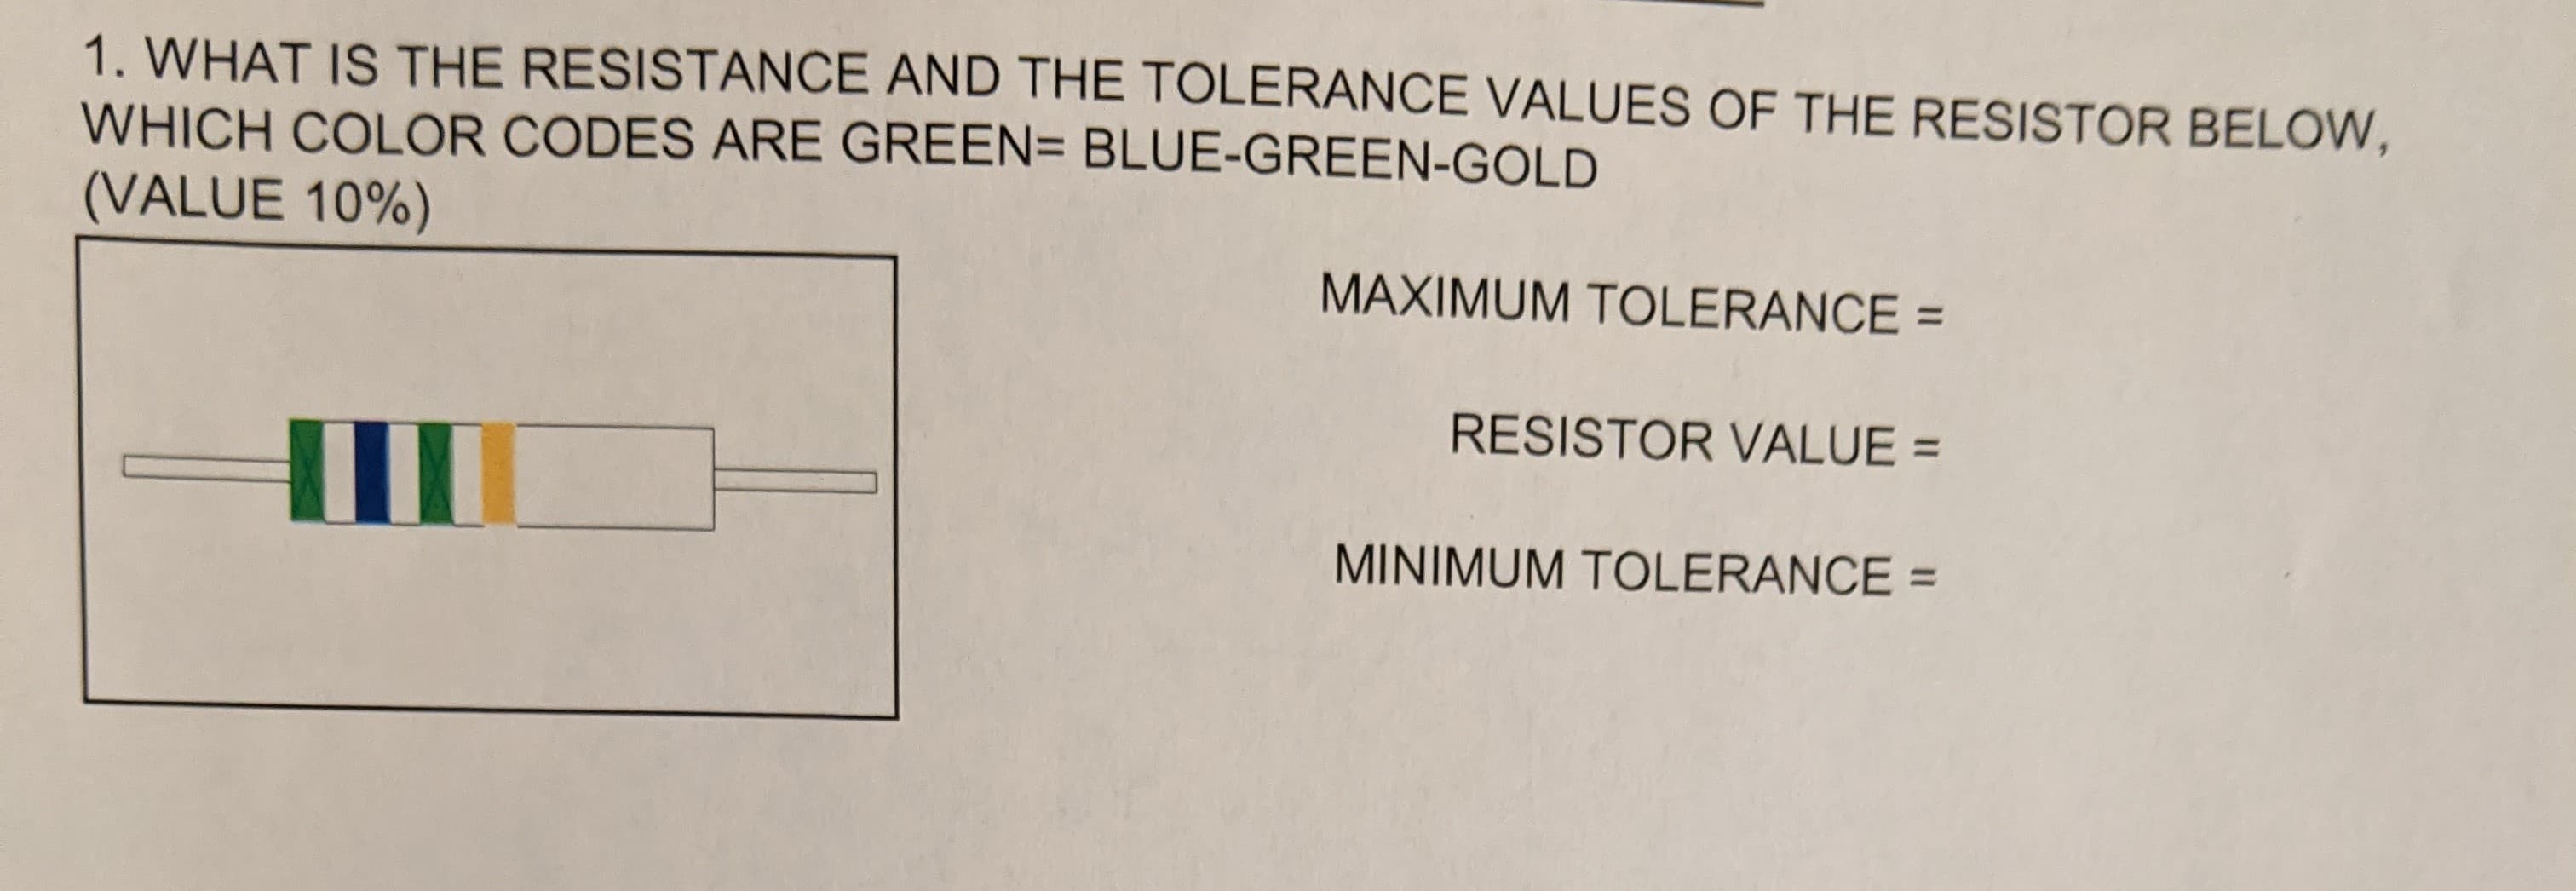 1. WHAT IS THE RESISTANCE AND THE TOLERANCE VALUES OF THE RESISTOR BELOW,
WHICH COLOR CODES ARE GREEN= BLUE-GREEN-GOLD
(VALUE 10%)
MAXIMUM TOLERANCE =
RESISTOR VALUE =
MINIMUM TOLERANCE =
